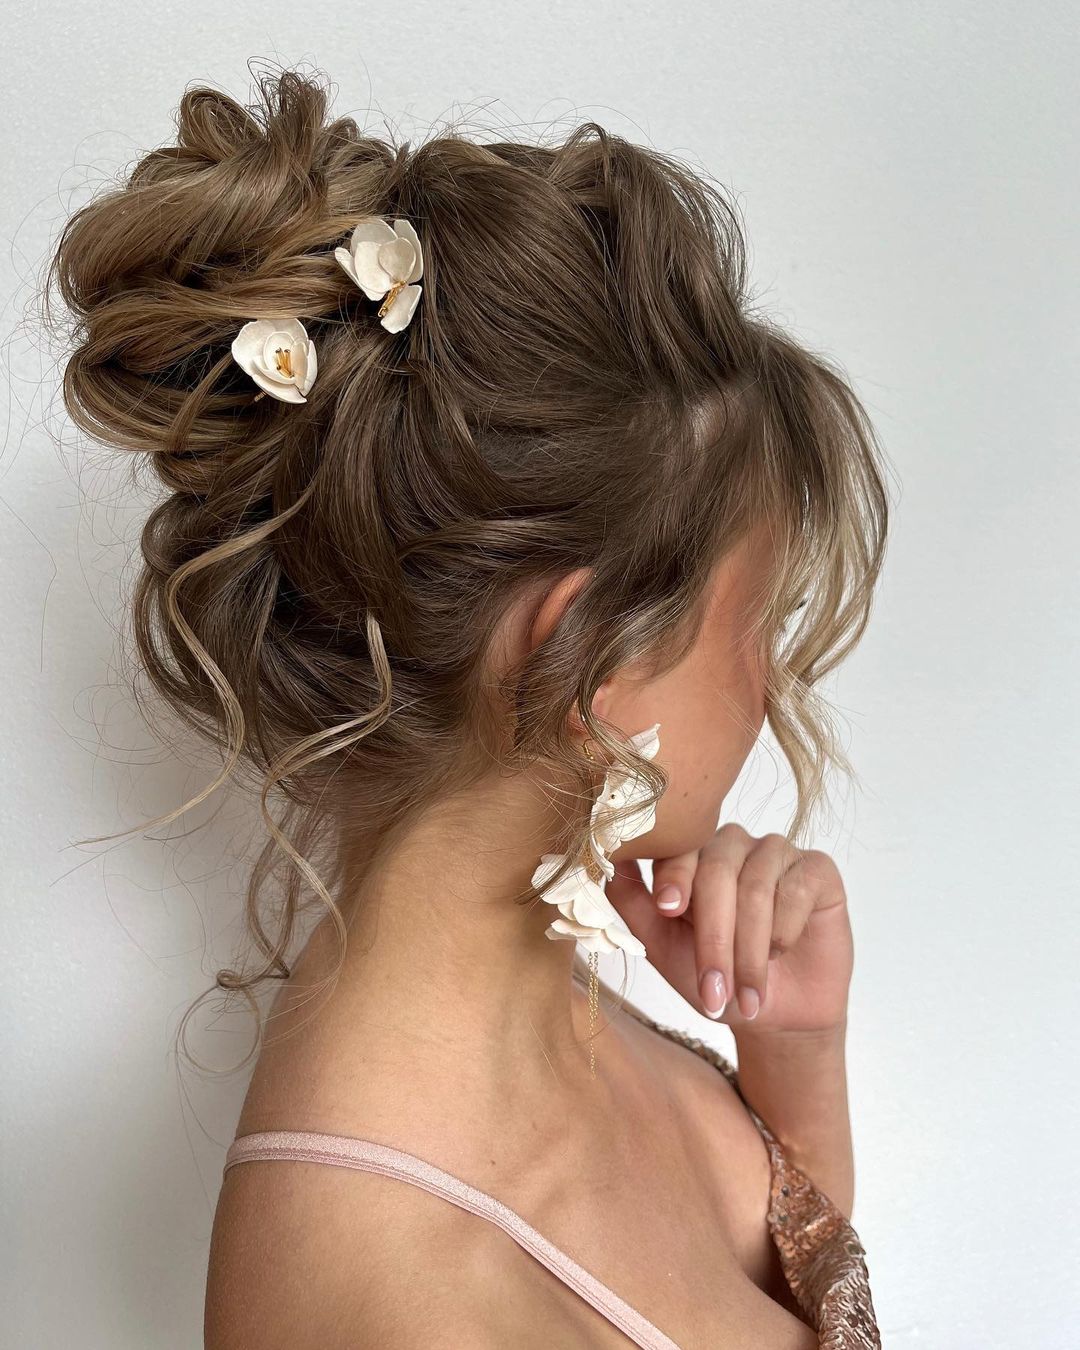 messy high bun updo hairstyle with flowers via jeny.stylist